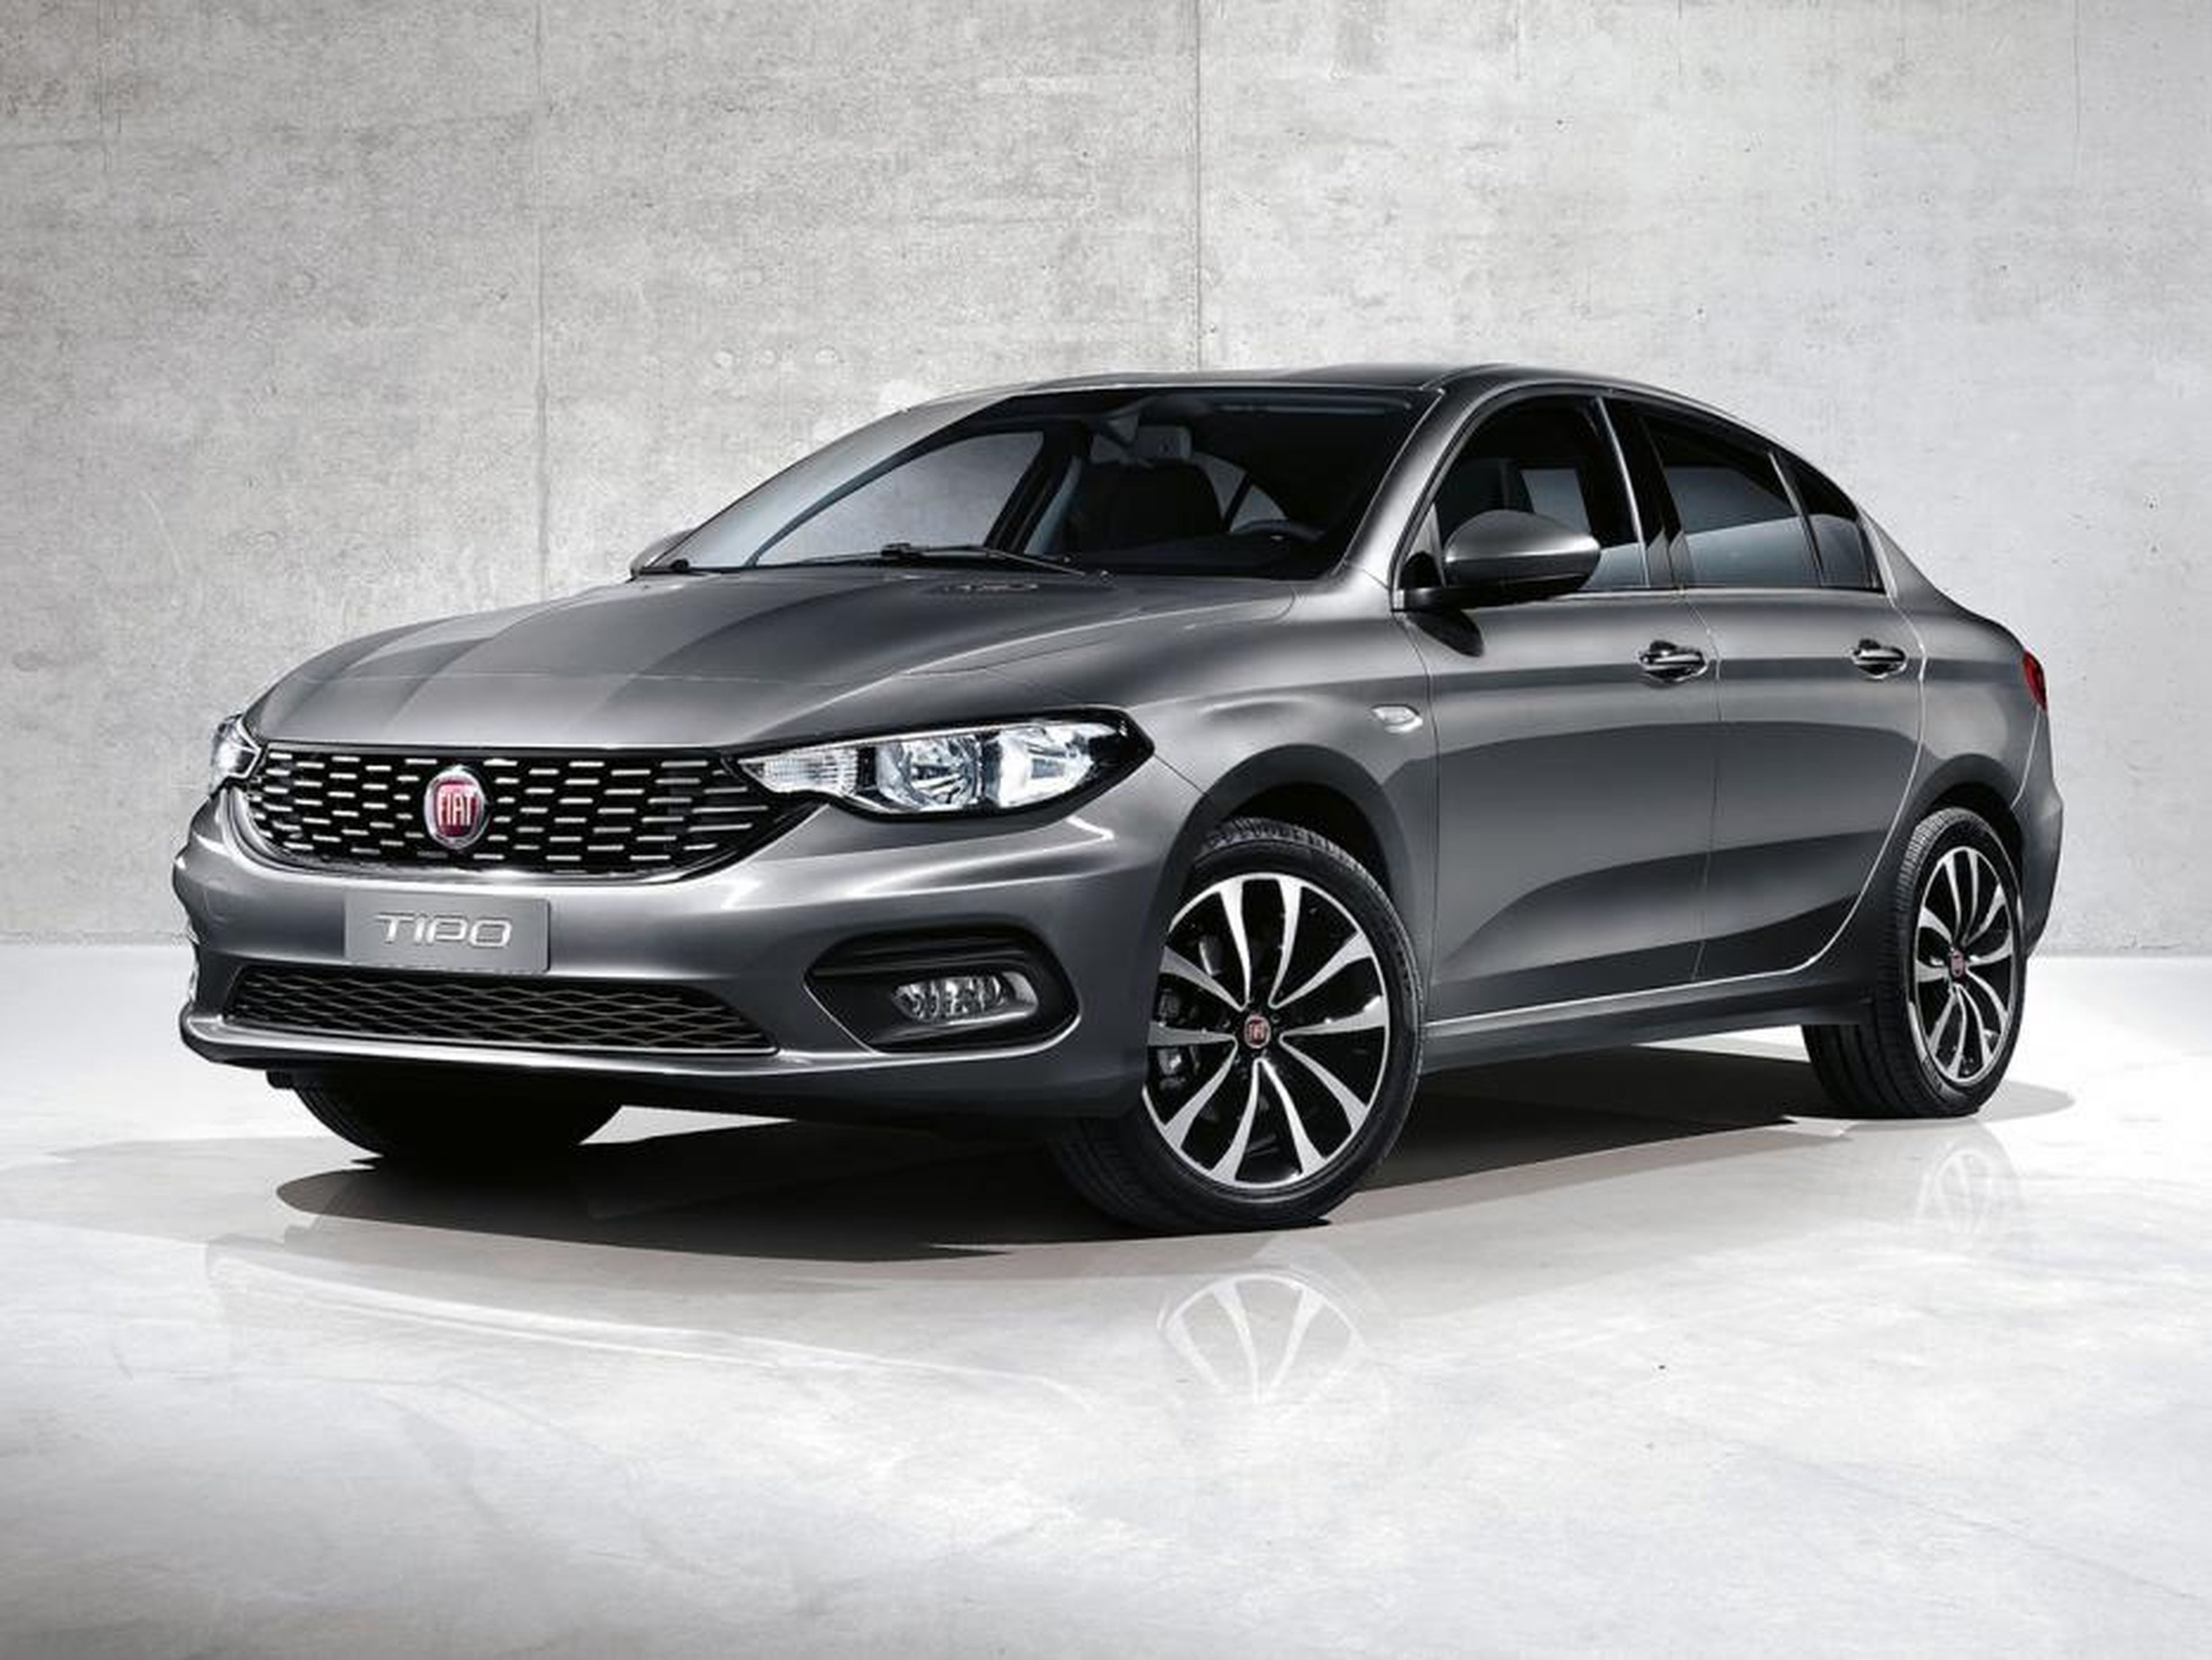 Fiat Tipo GLP